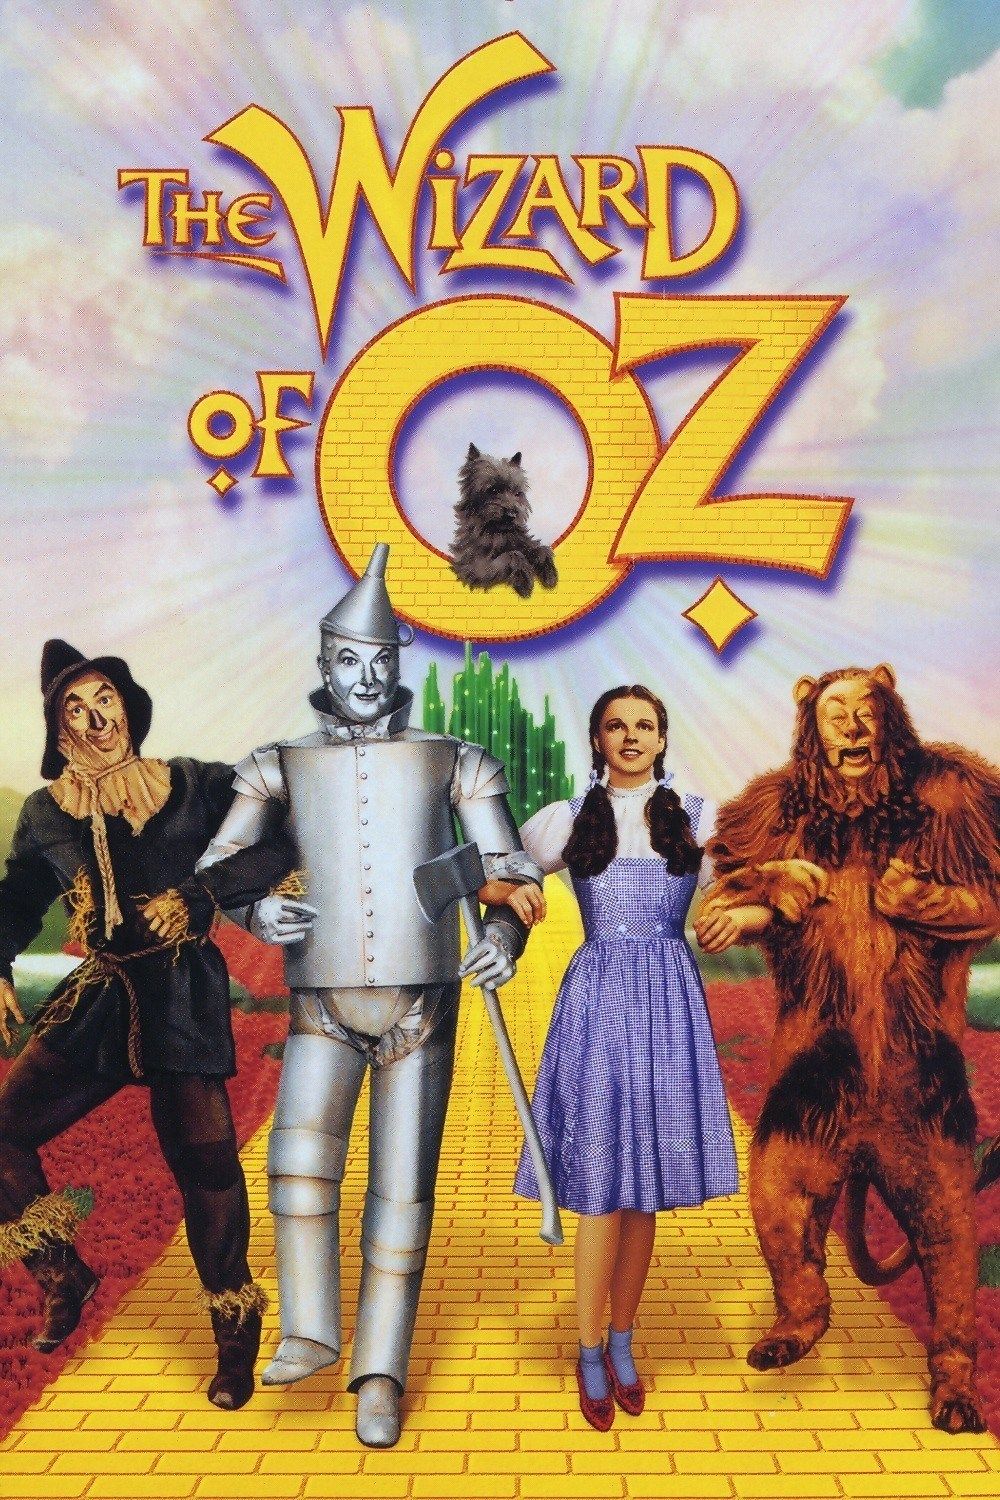 Wizard of Oz Archives - Imperial Theatre